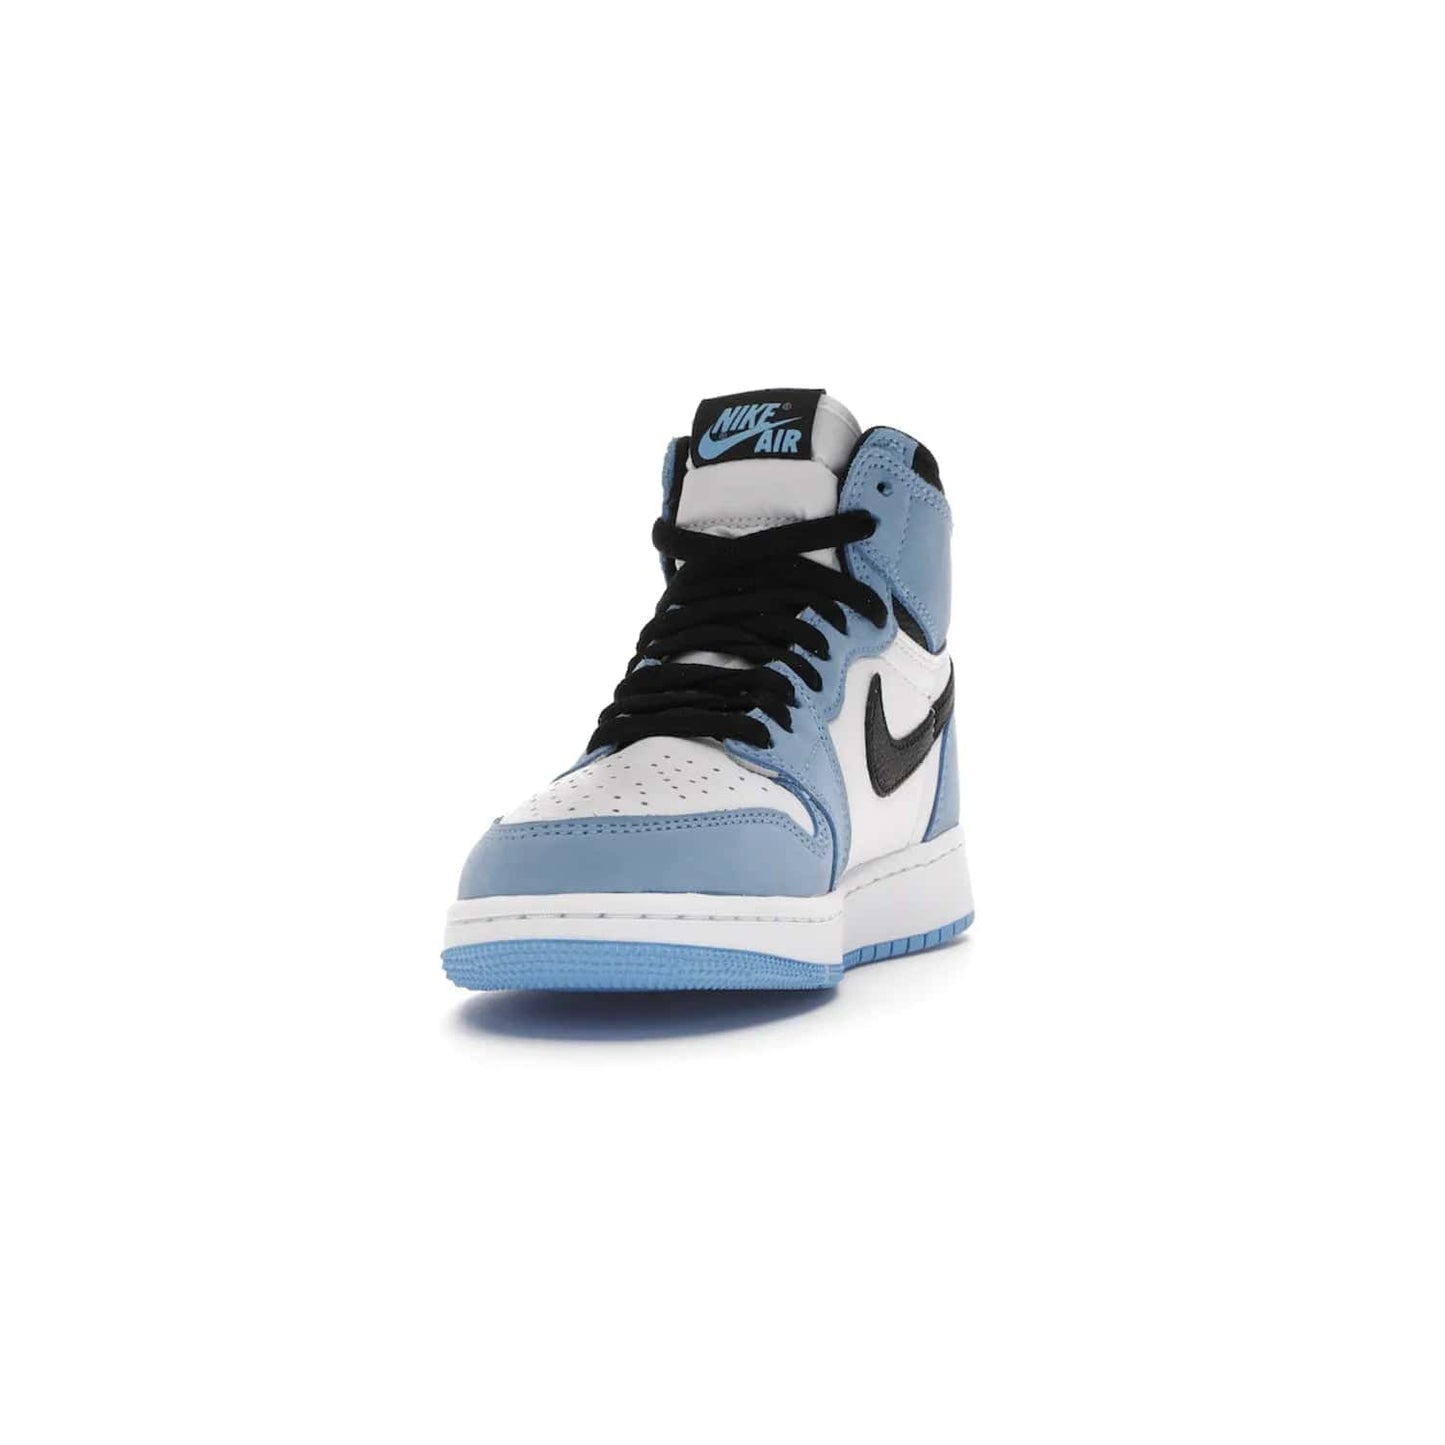 Jordan 1 Retro High White University Blue Black (GS) - Image 12 - Only at www.BallersClubKickz.com - Air Jordan 1 Retro High White University Blue Black GS: the latest offering from the iconic Air Jordan 1 line. White tumbled leather upper with University Blue overlays and black detailing. University Blue outsole and white midsole. March 6 release.